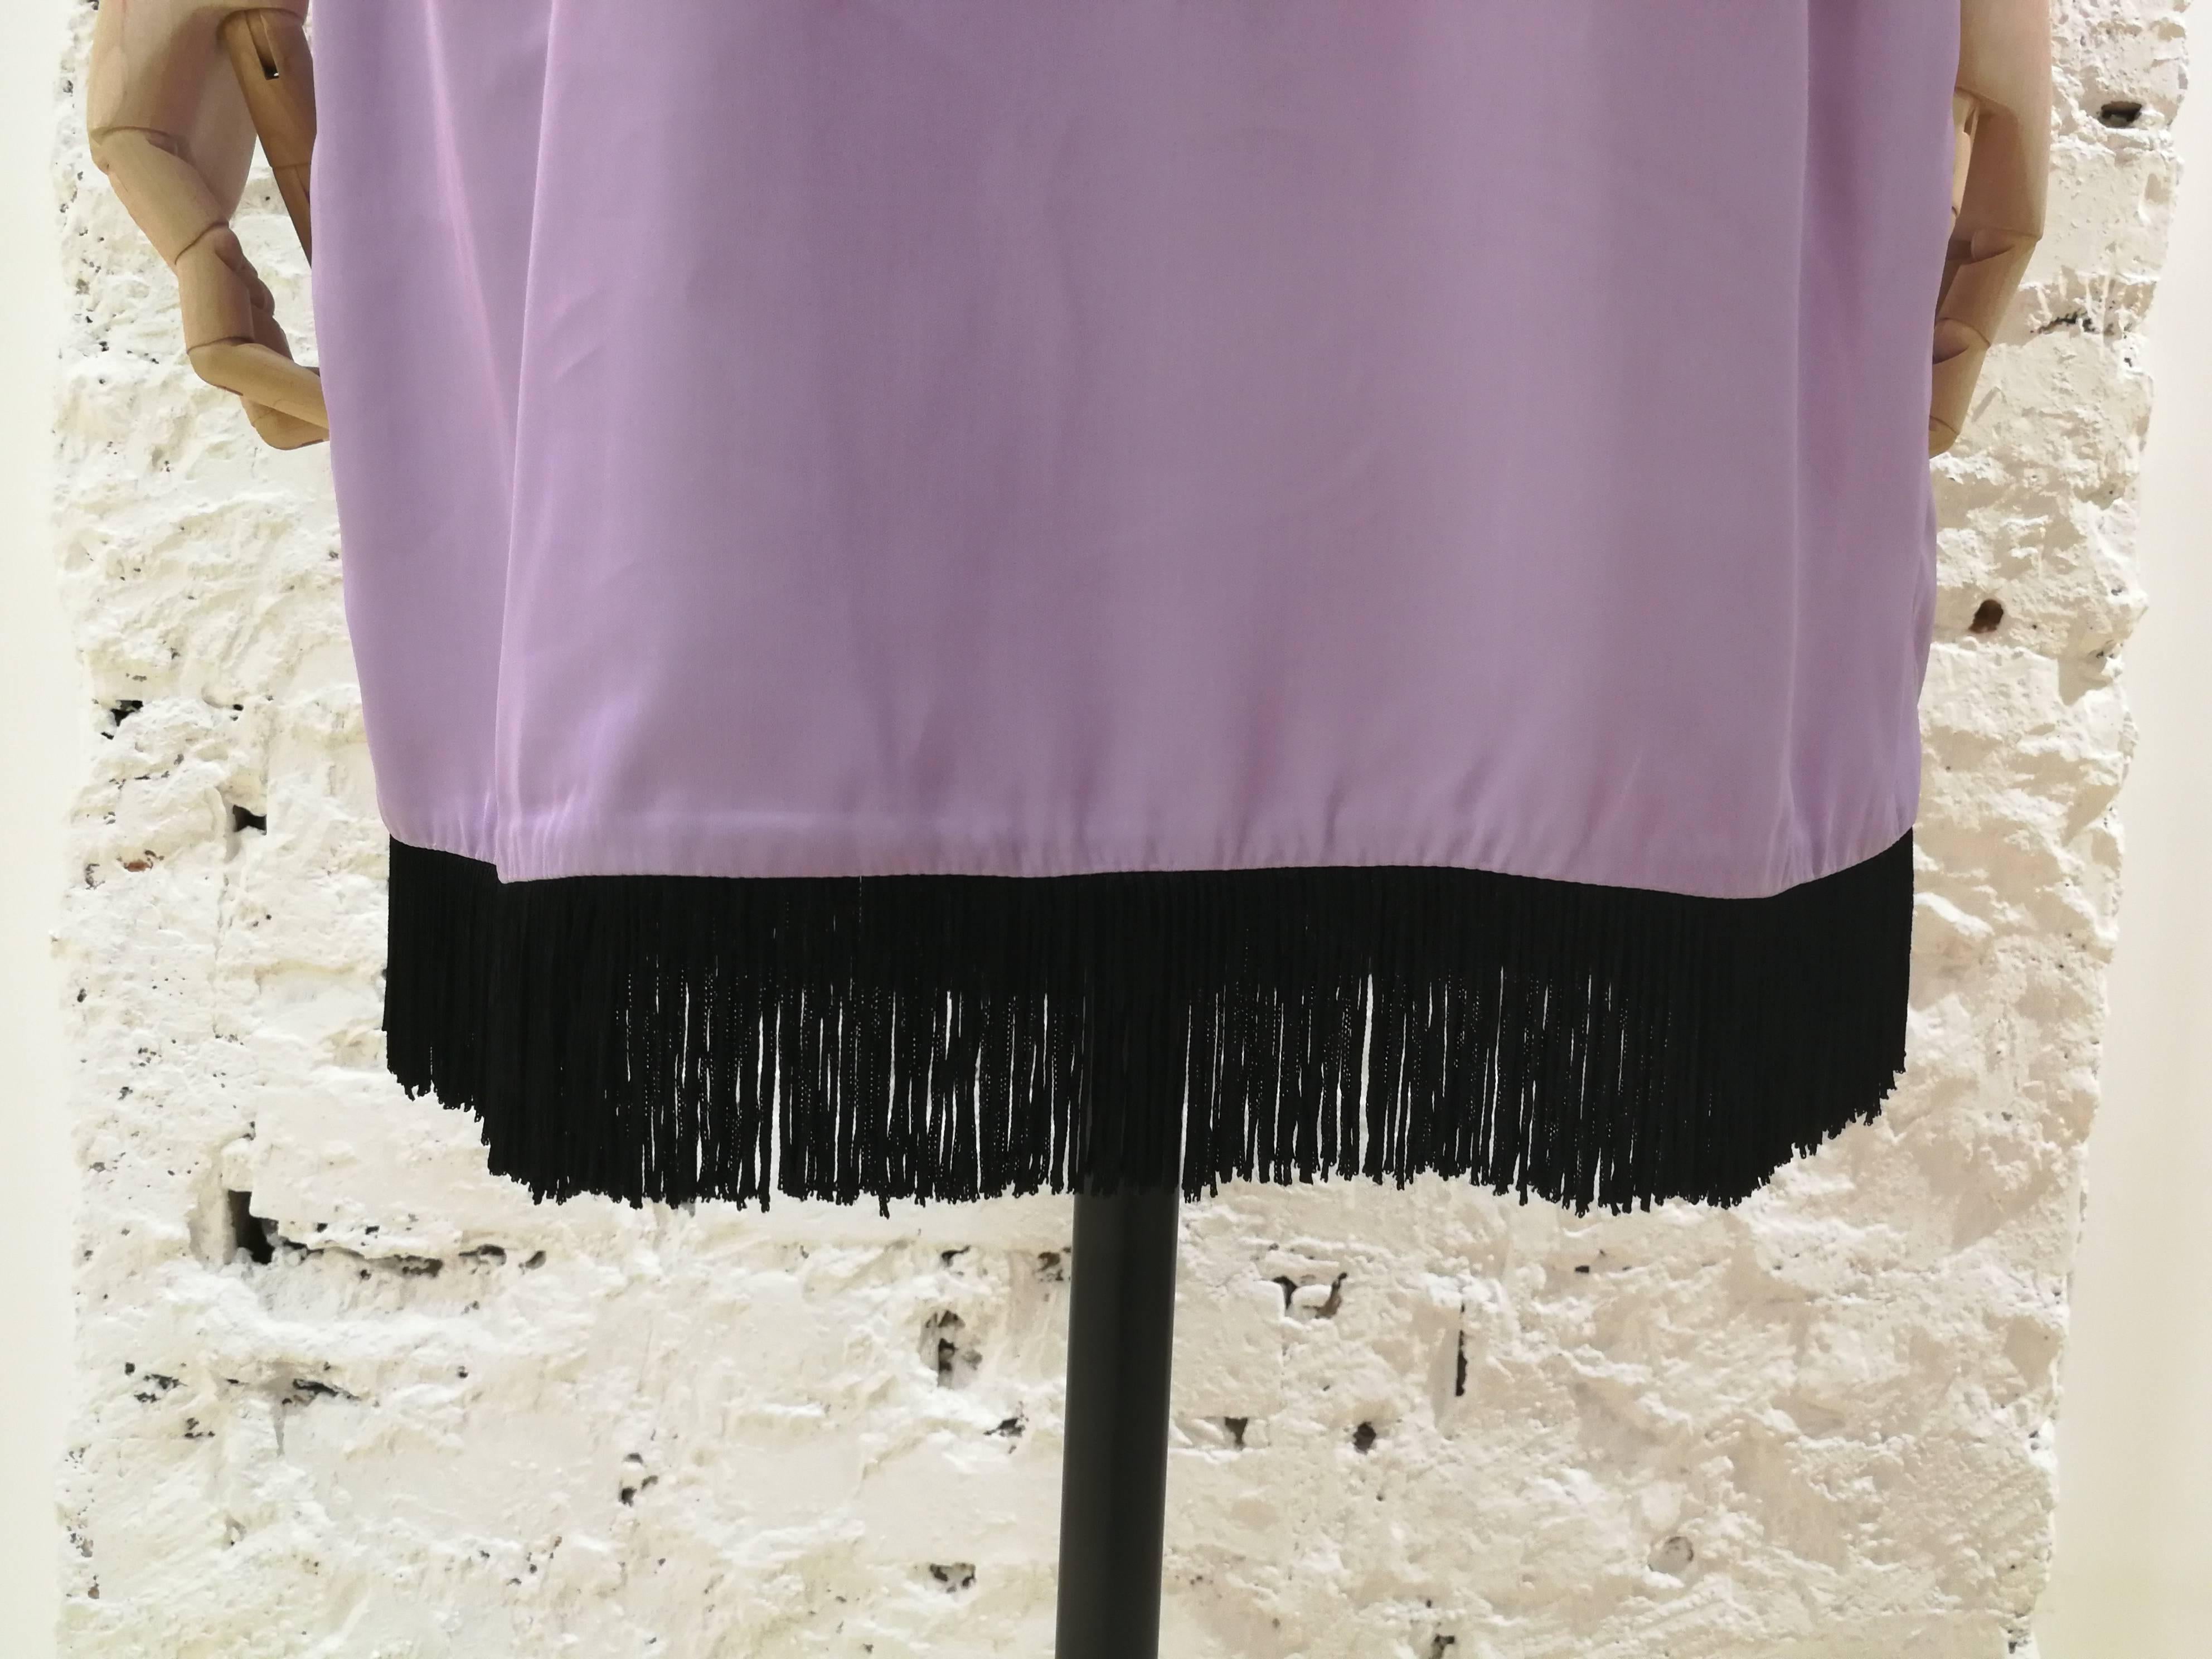 Versace Light Purple Black fringed Dress NWOT

Made in italy; light purple dress size 42

Composition: Cotton and silk